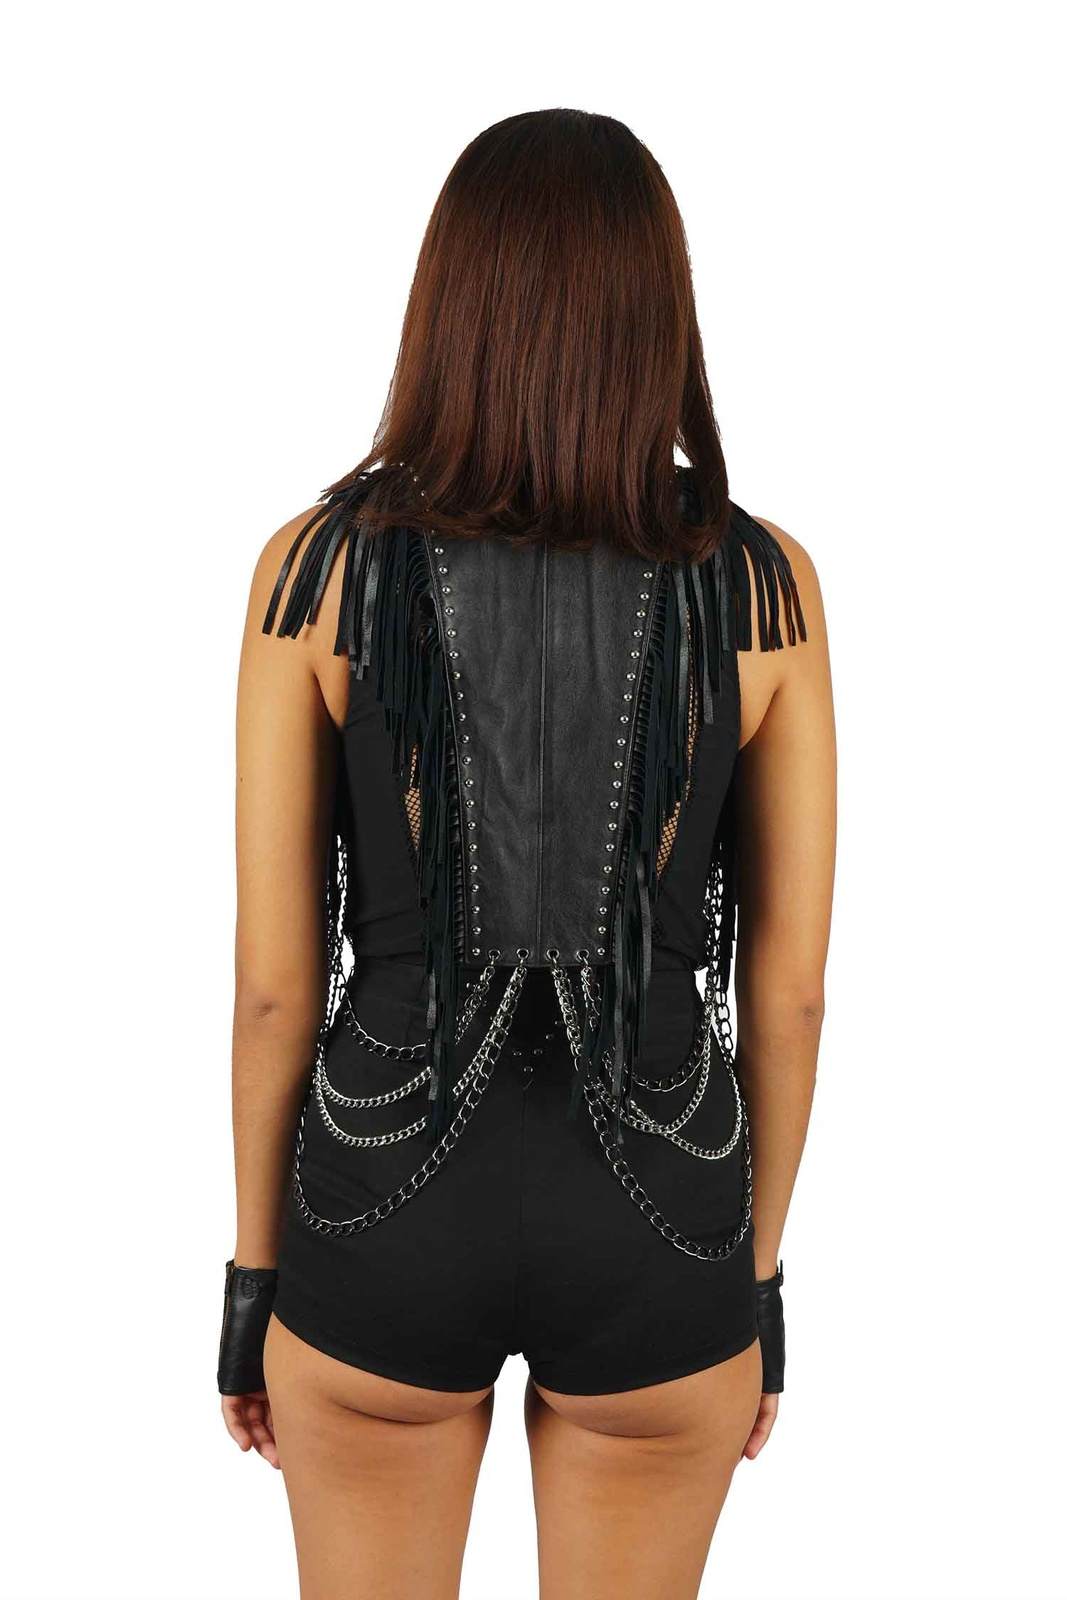 leather vest with tassels from Love Khaos